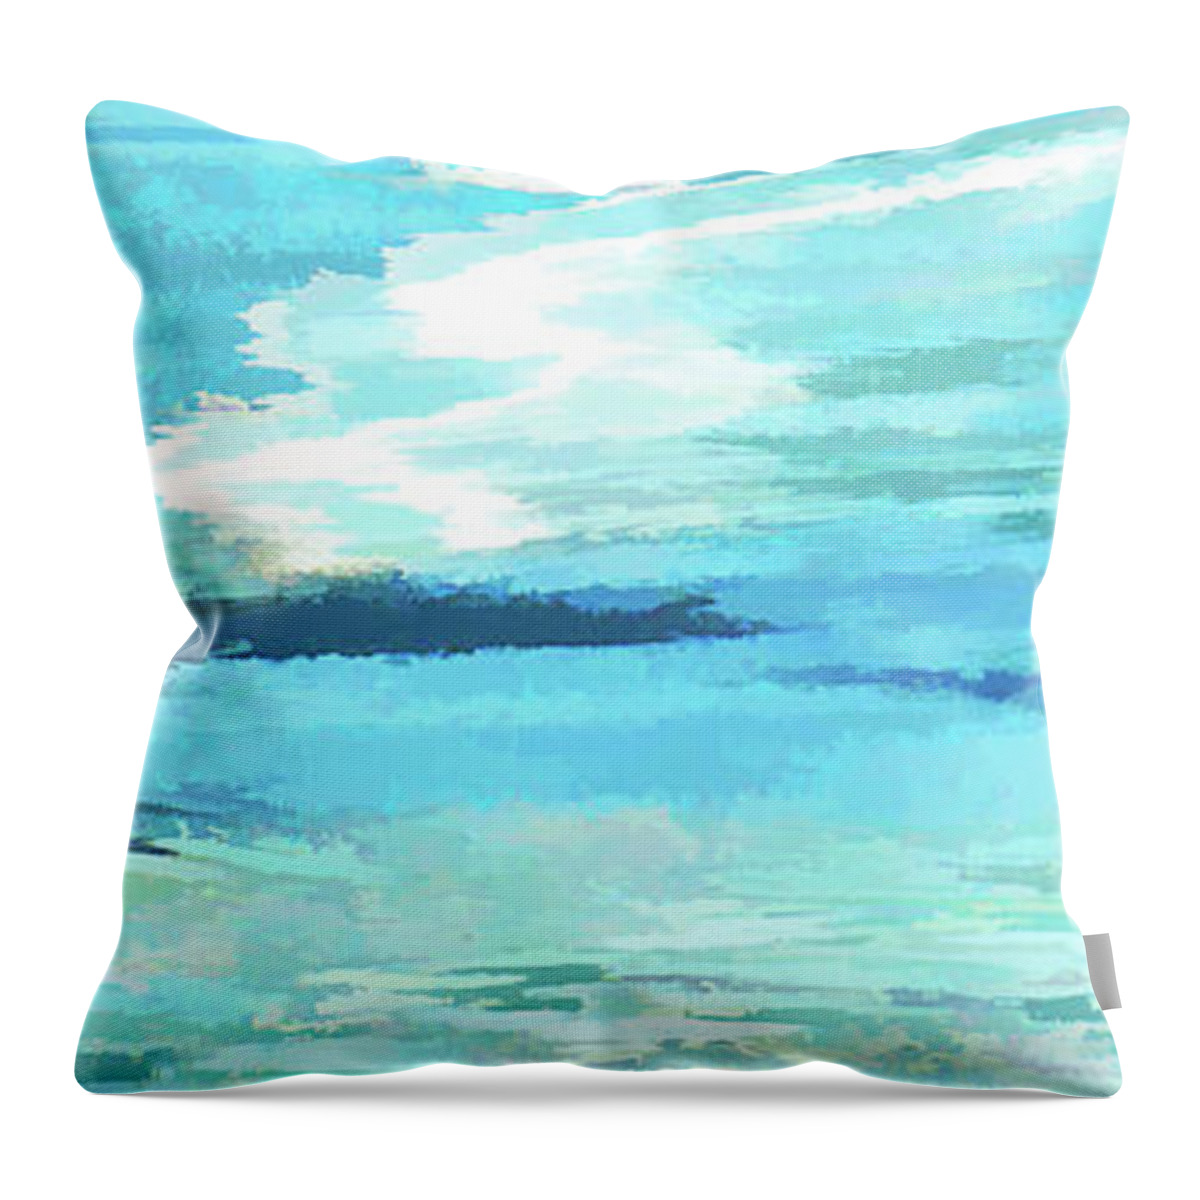 Hudson River Abstract Throw Pillow featuring the photograph Frosted River Abstract I by Regina Geoghan